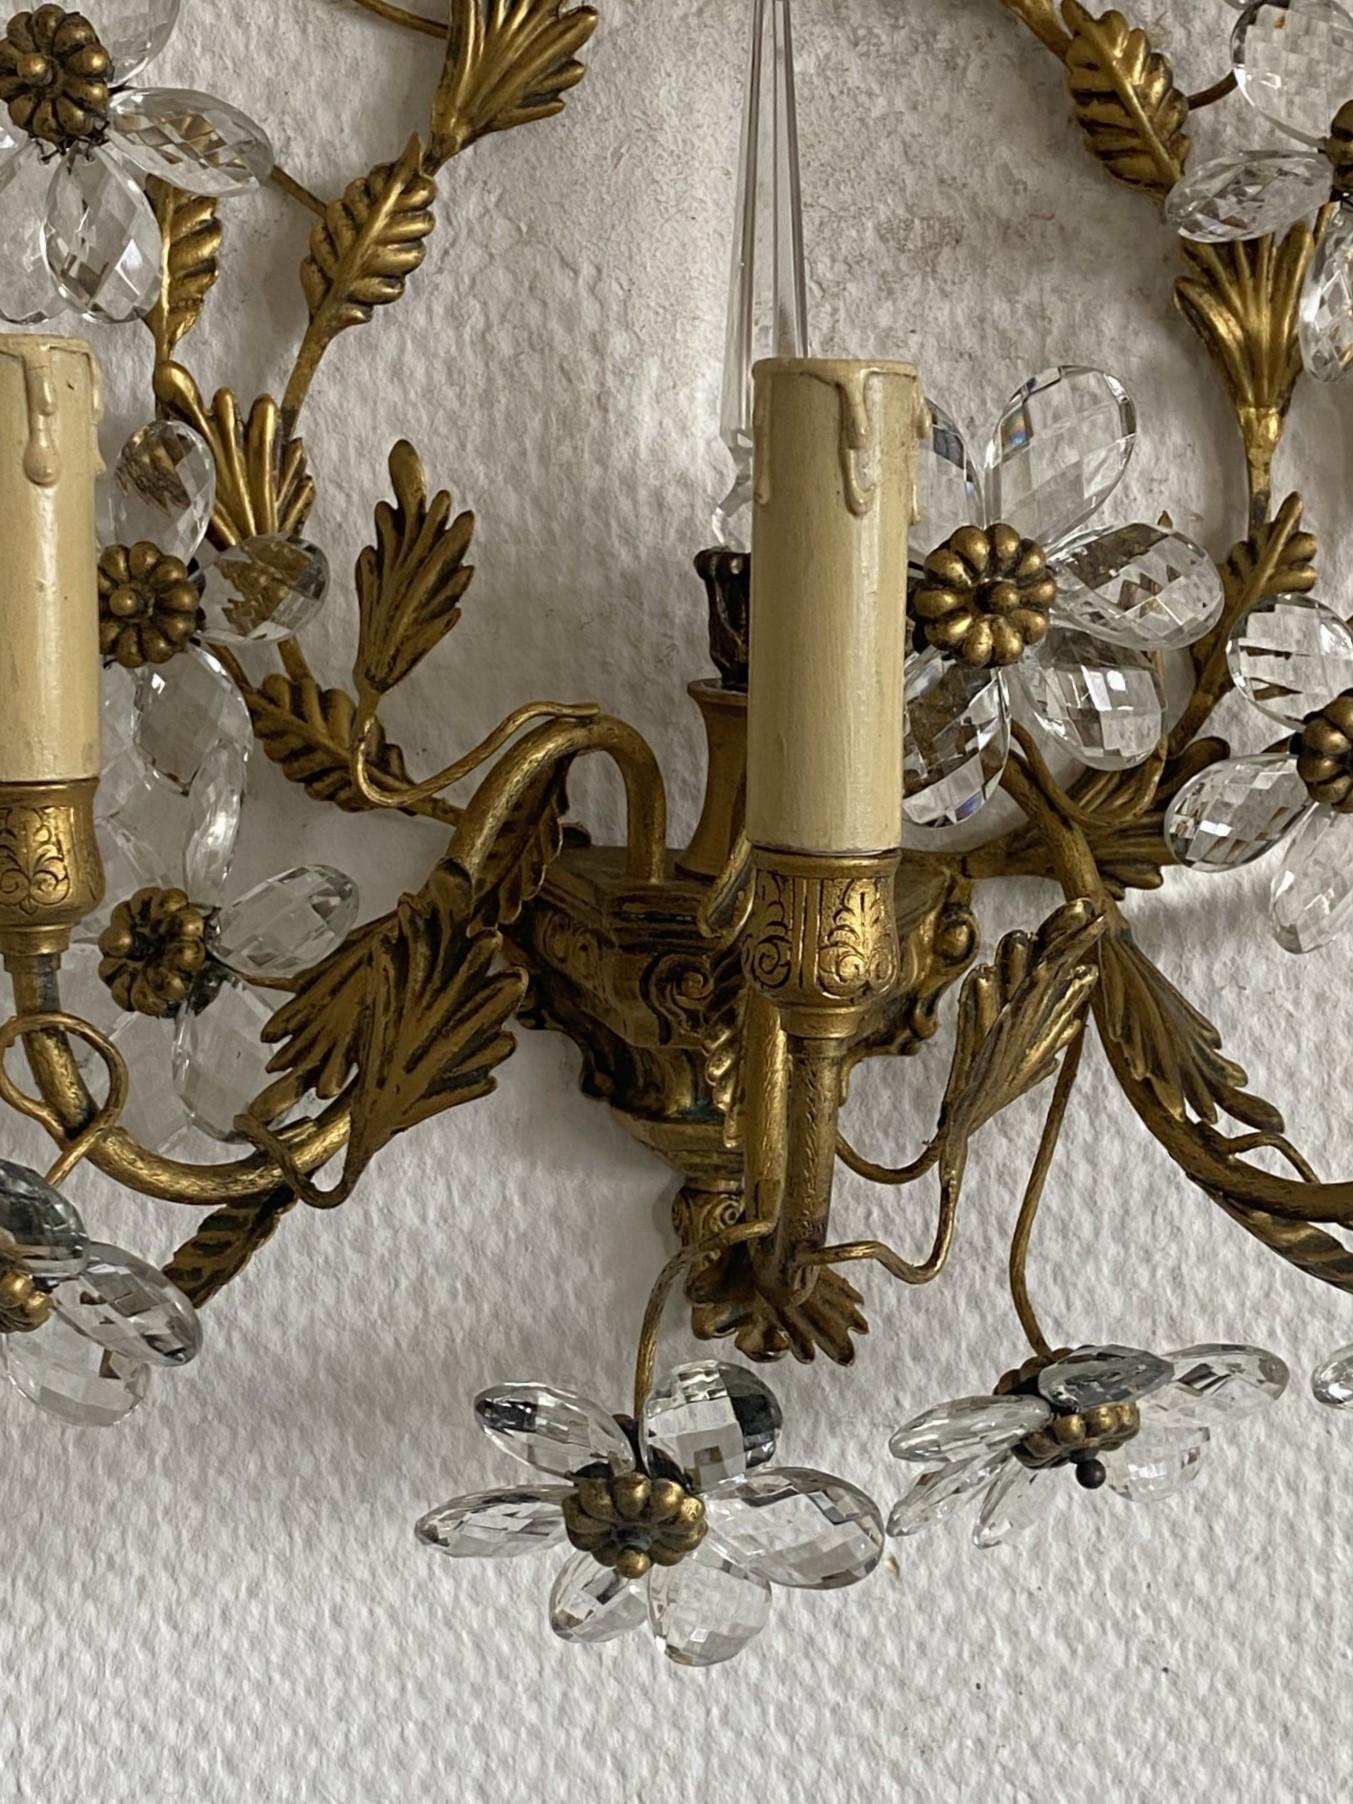 Pair of Large Maison Baguès Wrought Iron Crystal Flower Wall Sconces, 1930s For Sale 11